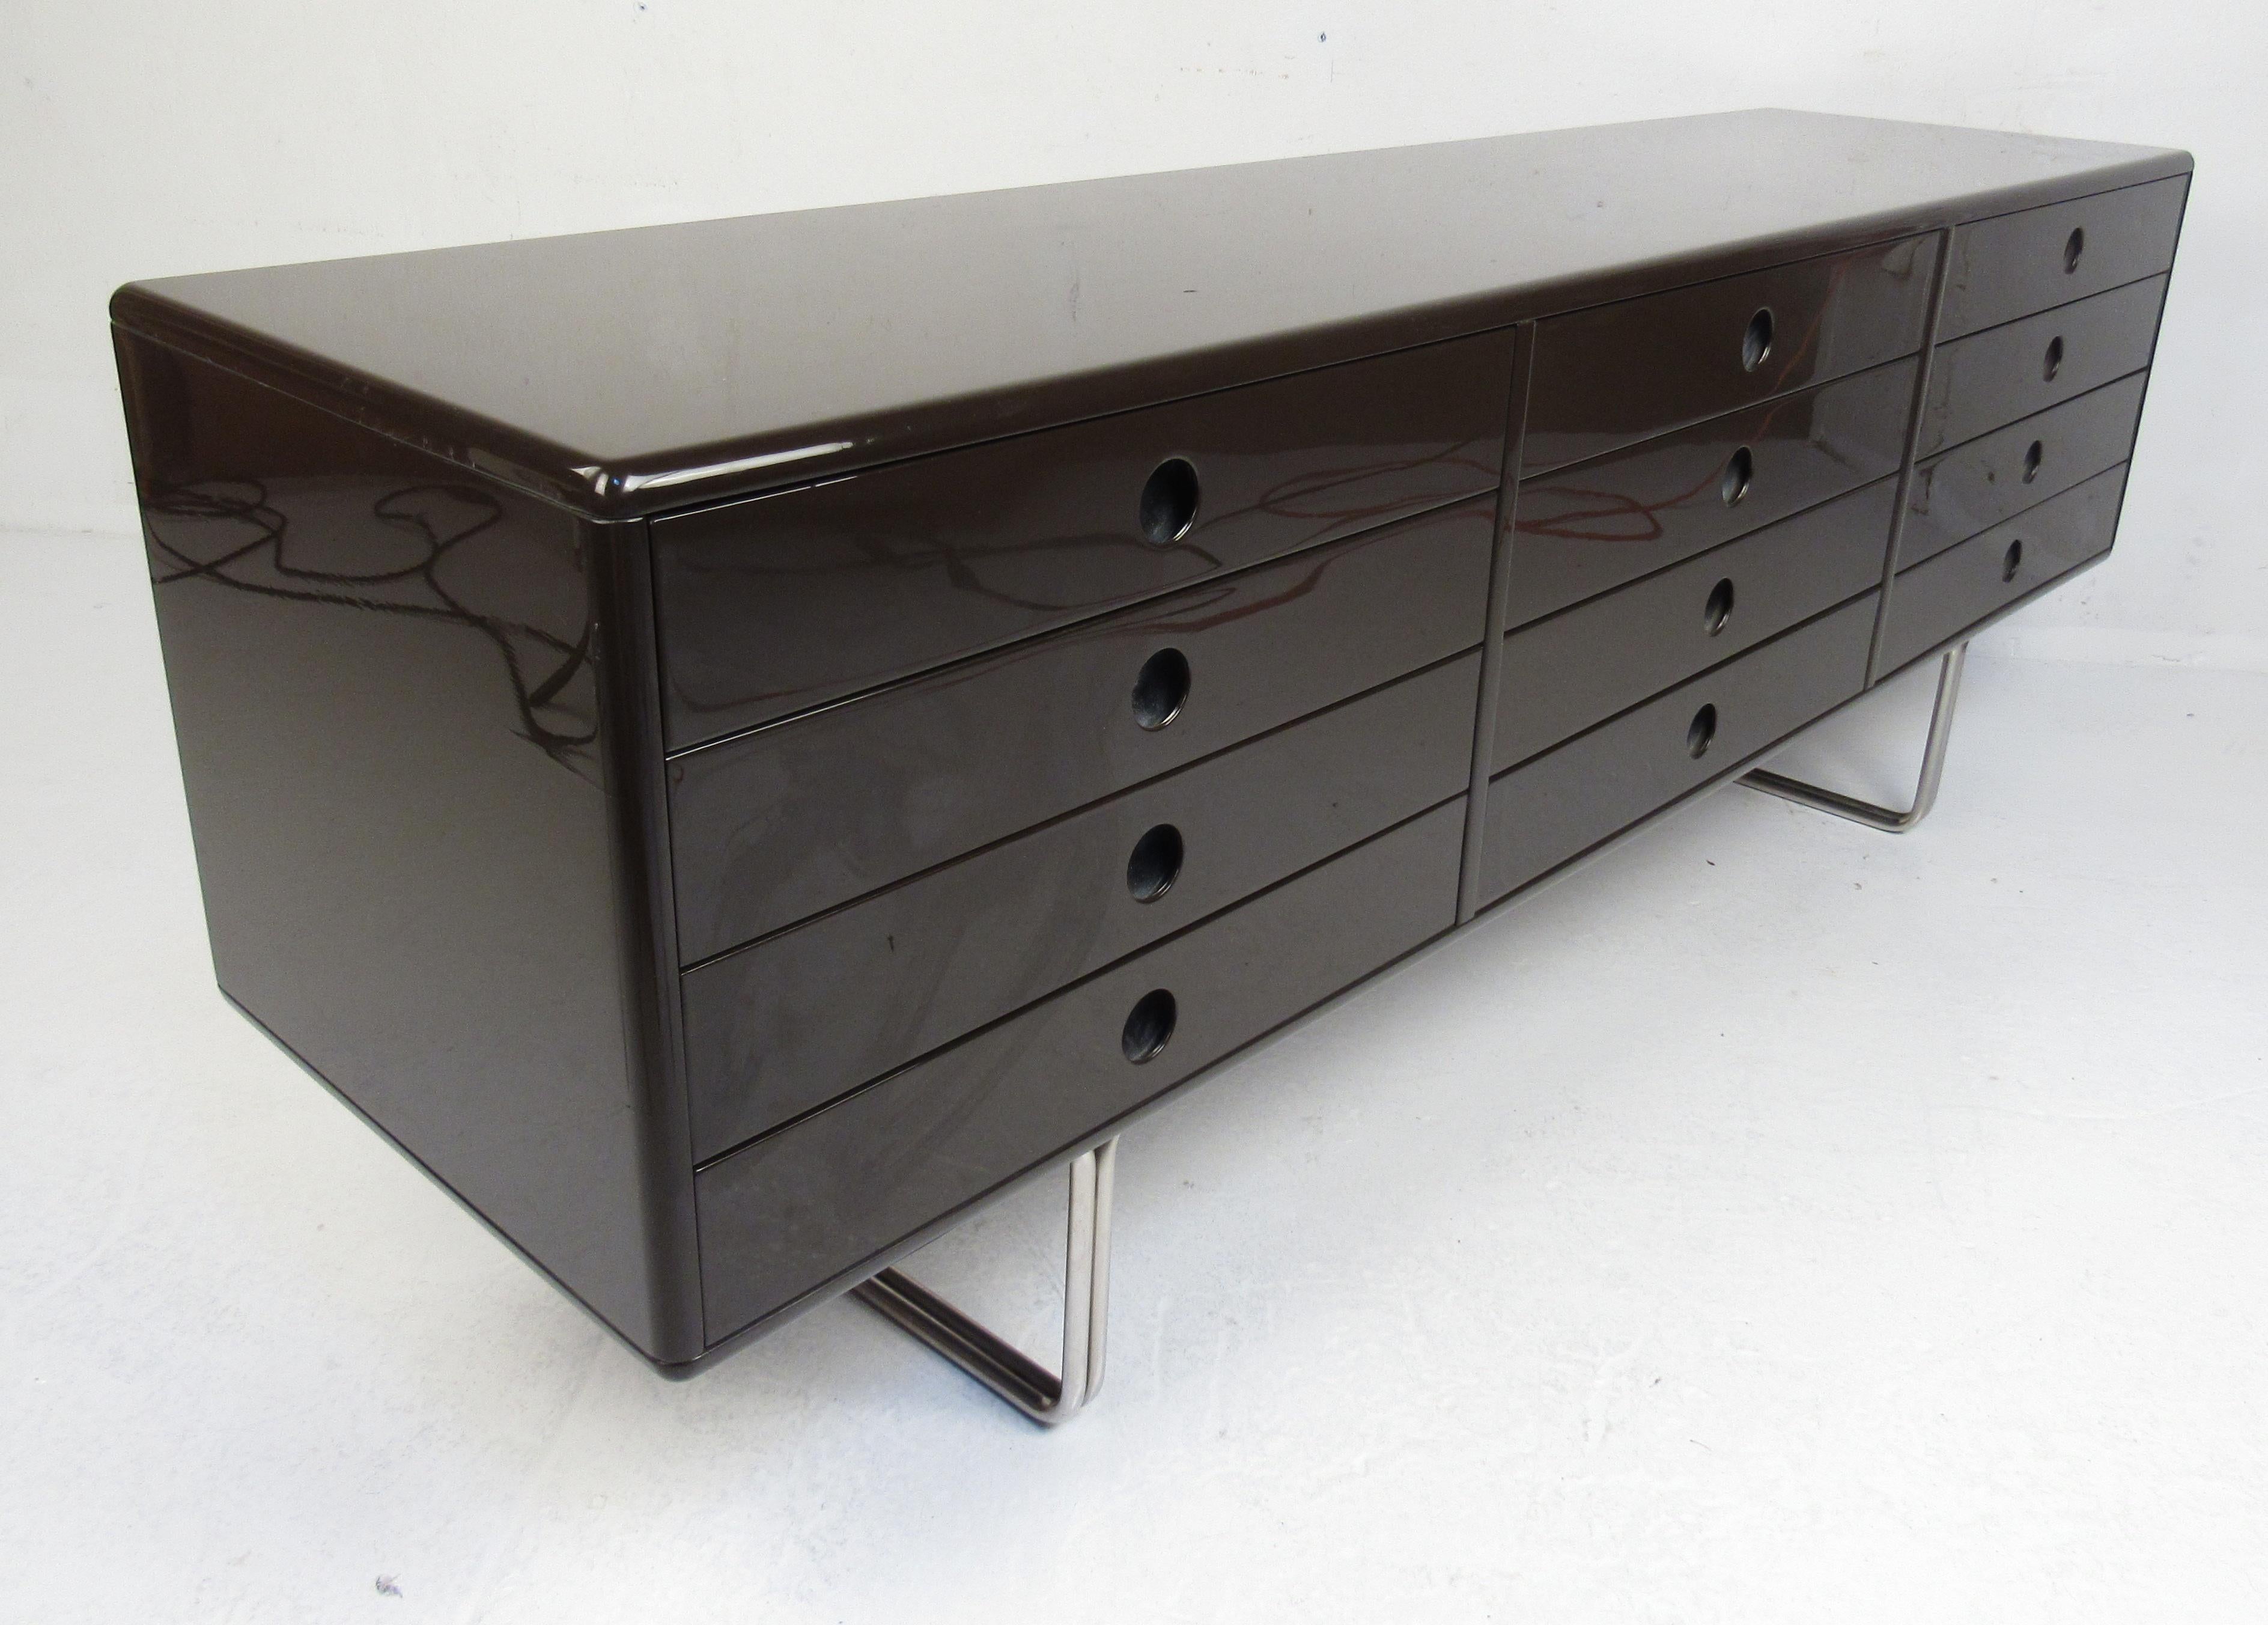 Stylish brown lacquer twelve-drawer dresser with sleek Italian modern styling, recessed drawer pulls, and chrome legs. Please confirm item location (NY or NJ) with dealer.